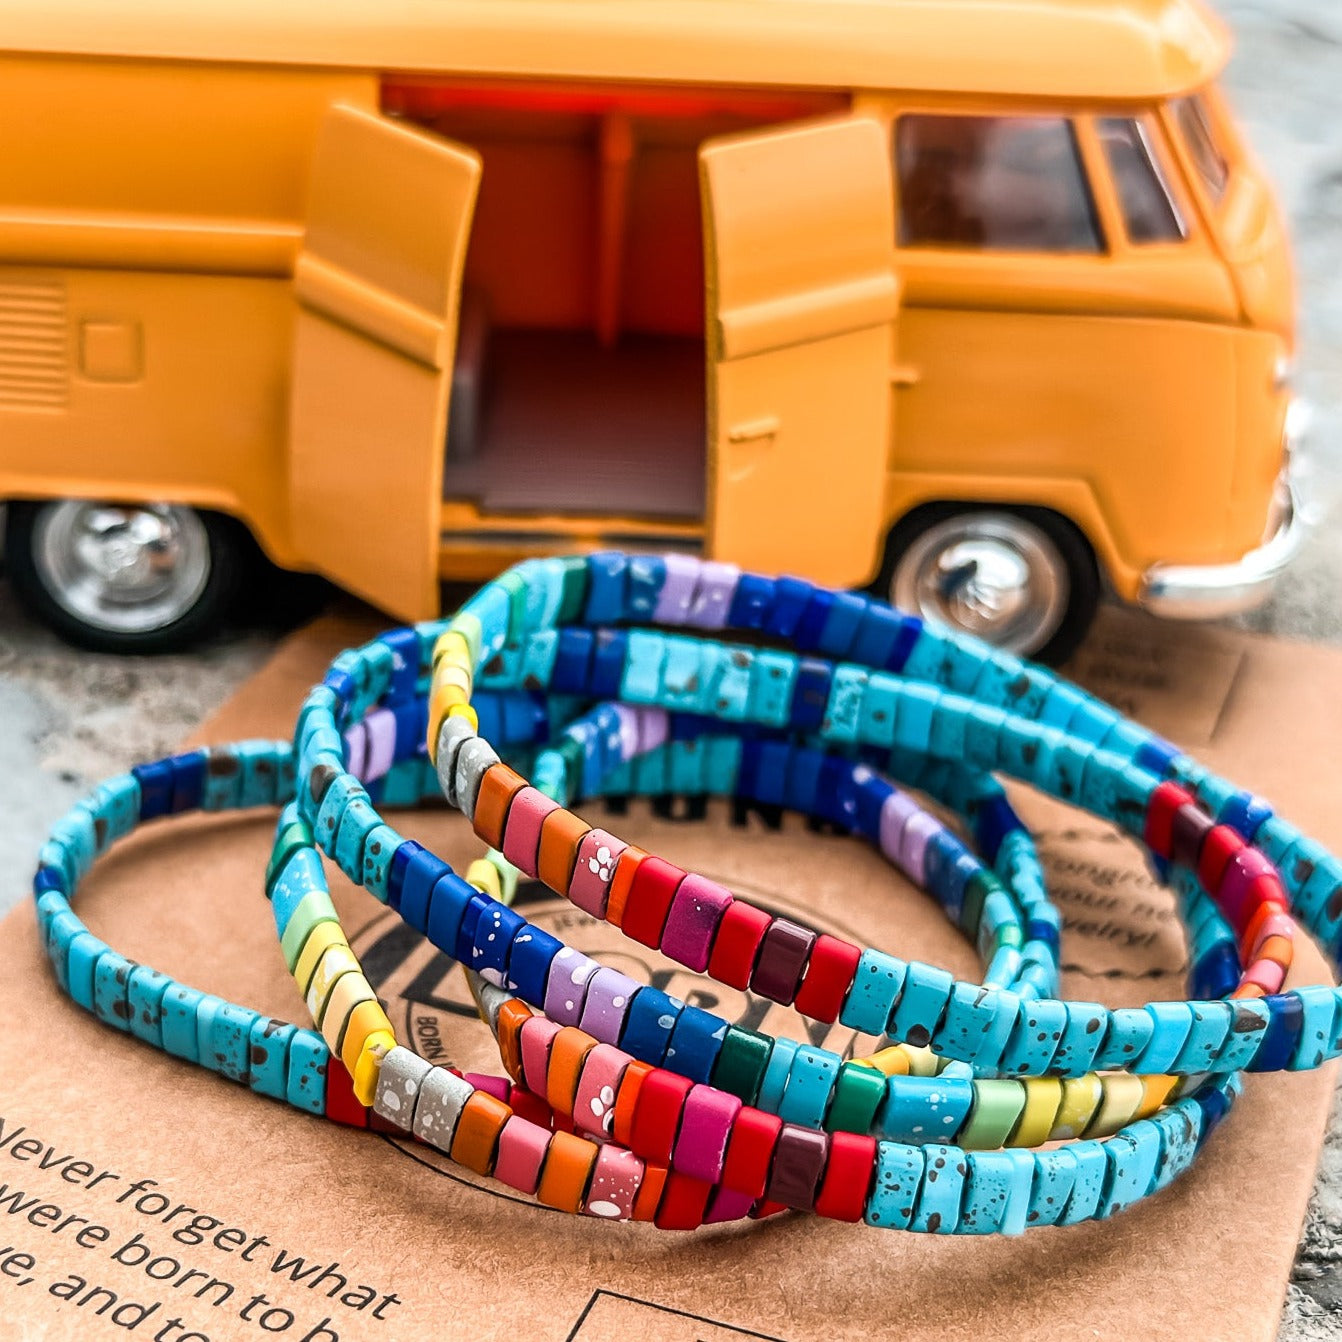 Colored tila beads stretch handmade bracelets made by Born to Rock Jewelry. Surf and sports inspired jewelry brand. A family-owned business that rocks! Based in San Diego California.